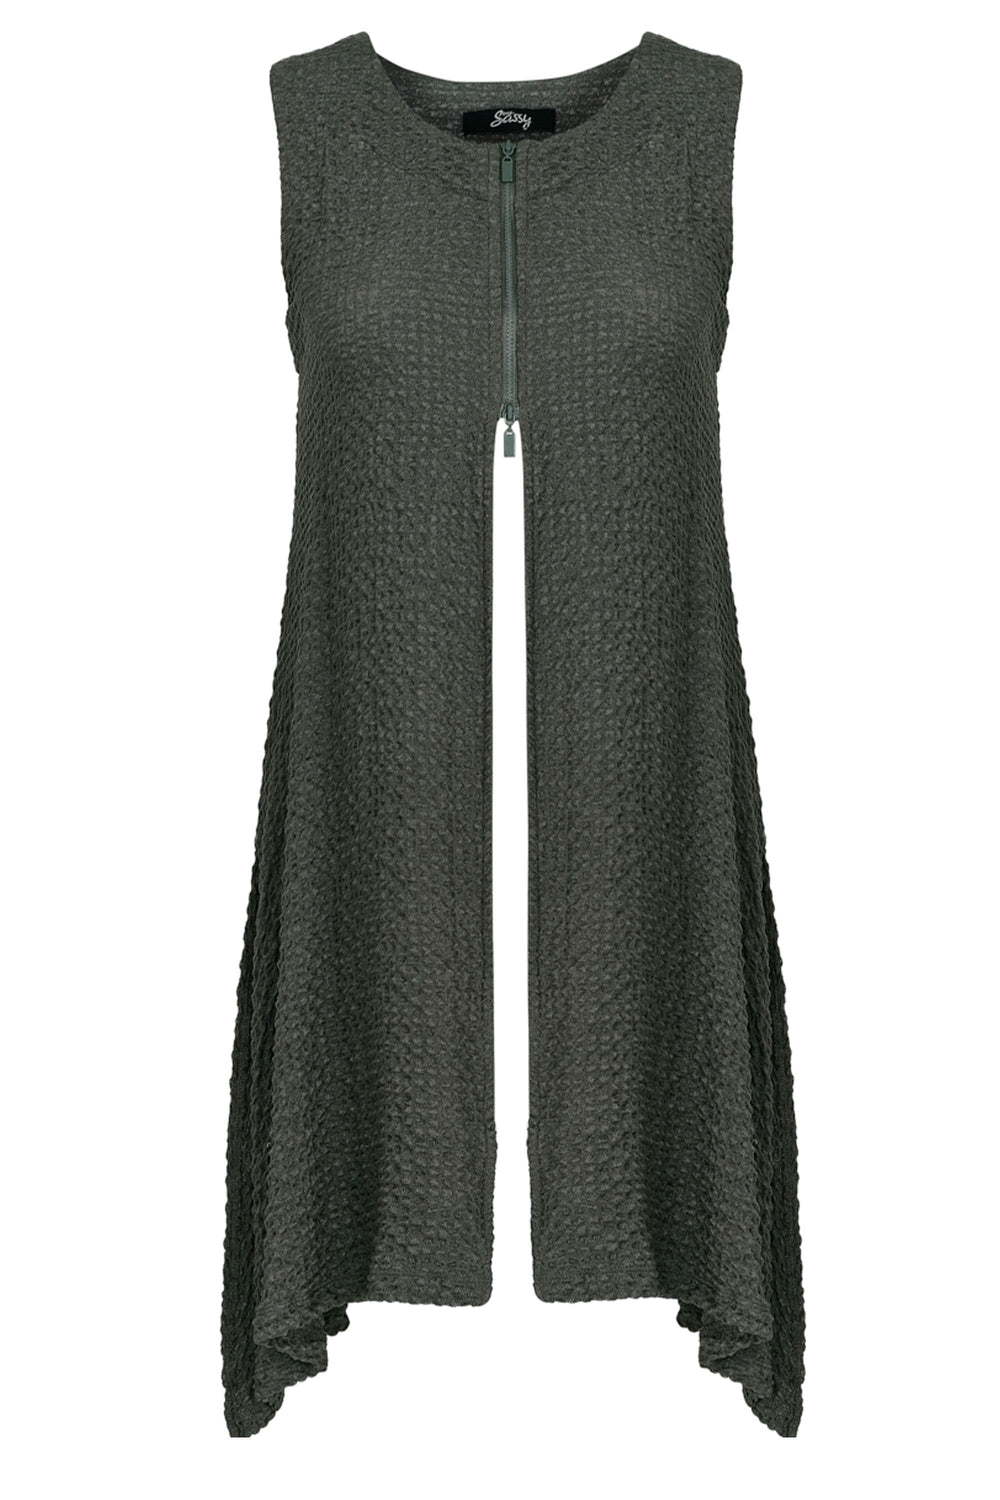 EVER SASSY Spring 2024 This vest features a relaxed silhouette, smart round neckline and quarter front zipper. A chic relaxed sleeveless open front style that is sure to standout.